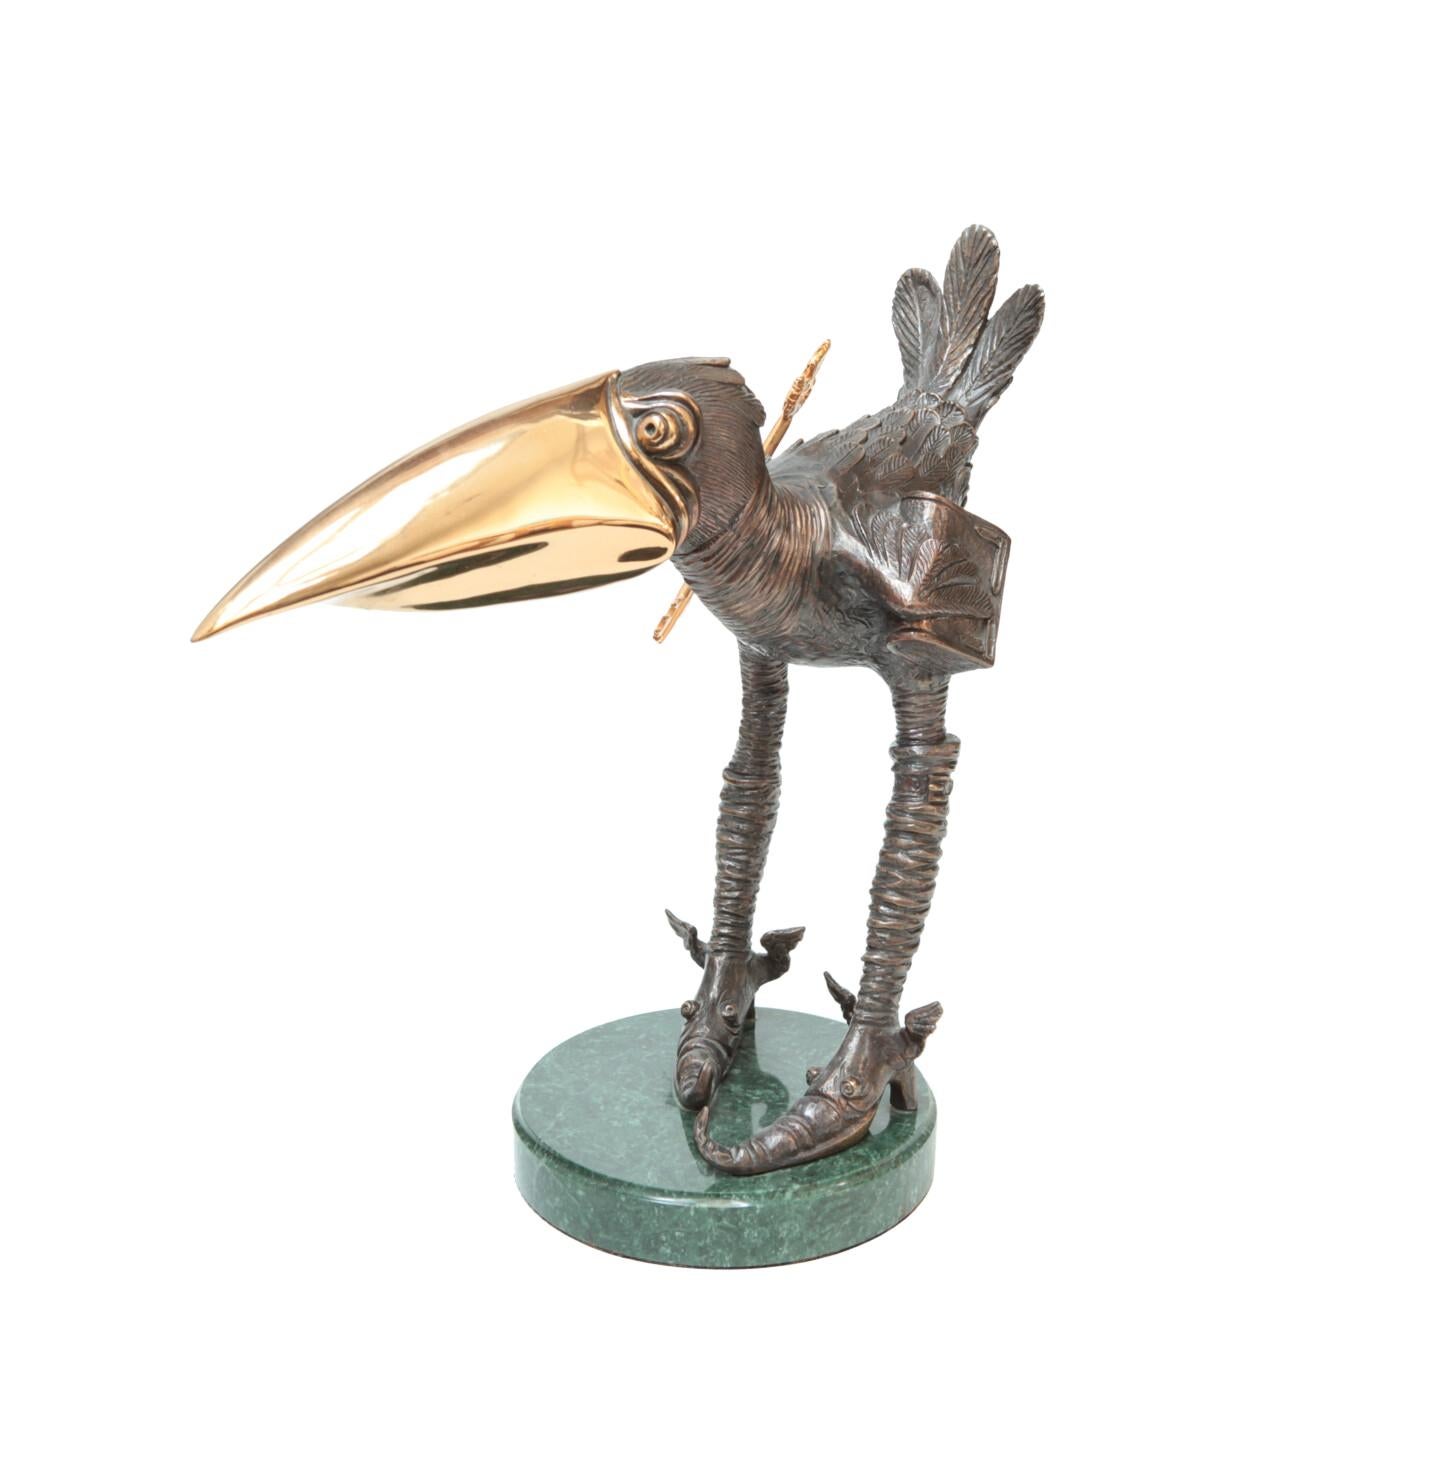 Volodymyr Mykytenko - The Bird of Happiness (2005)

The Bird of Happiness-my bird fulfills all desires and brings happiness to this world. A gilded key opens all doors and a book as a symbol of wisdom

Additional information:
Medium: Bronze,